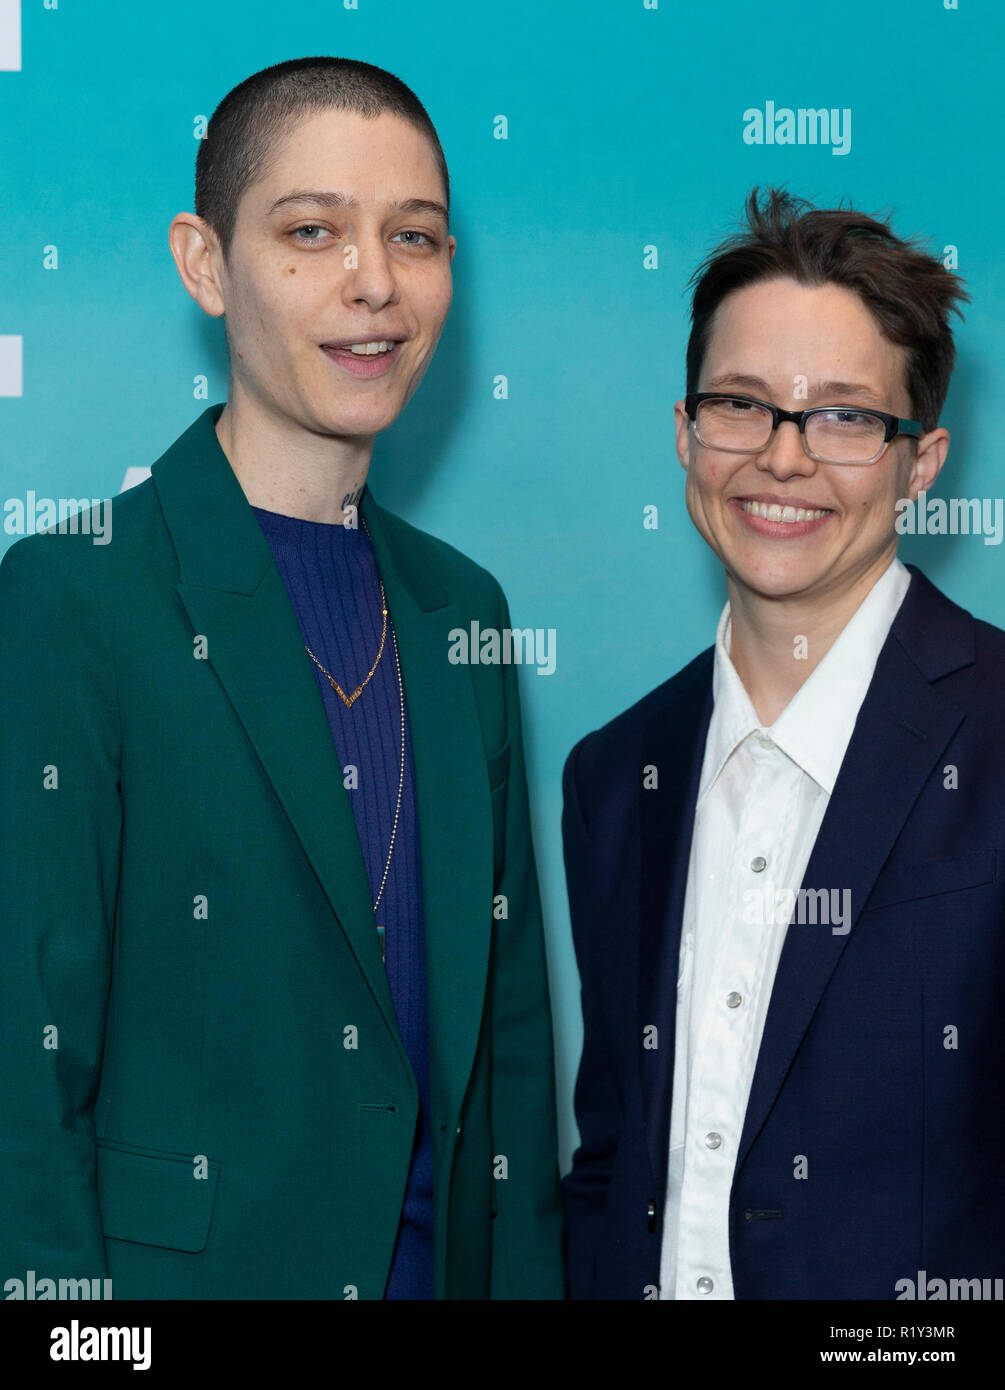 New York, USA - November 14, 2018: Asia Kate Dillon (L) attends the Showtime Series Premiere of Escape At Dannemora at Alice Tully Hall Lincoln Center Credit: lev radin/Alamy Live News Stock Photo